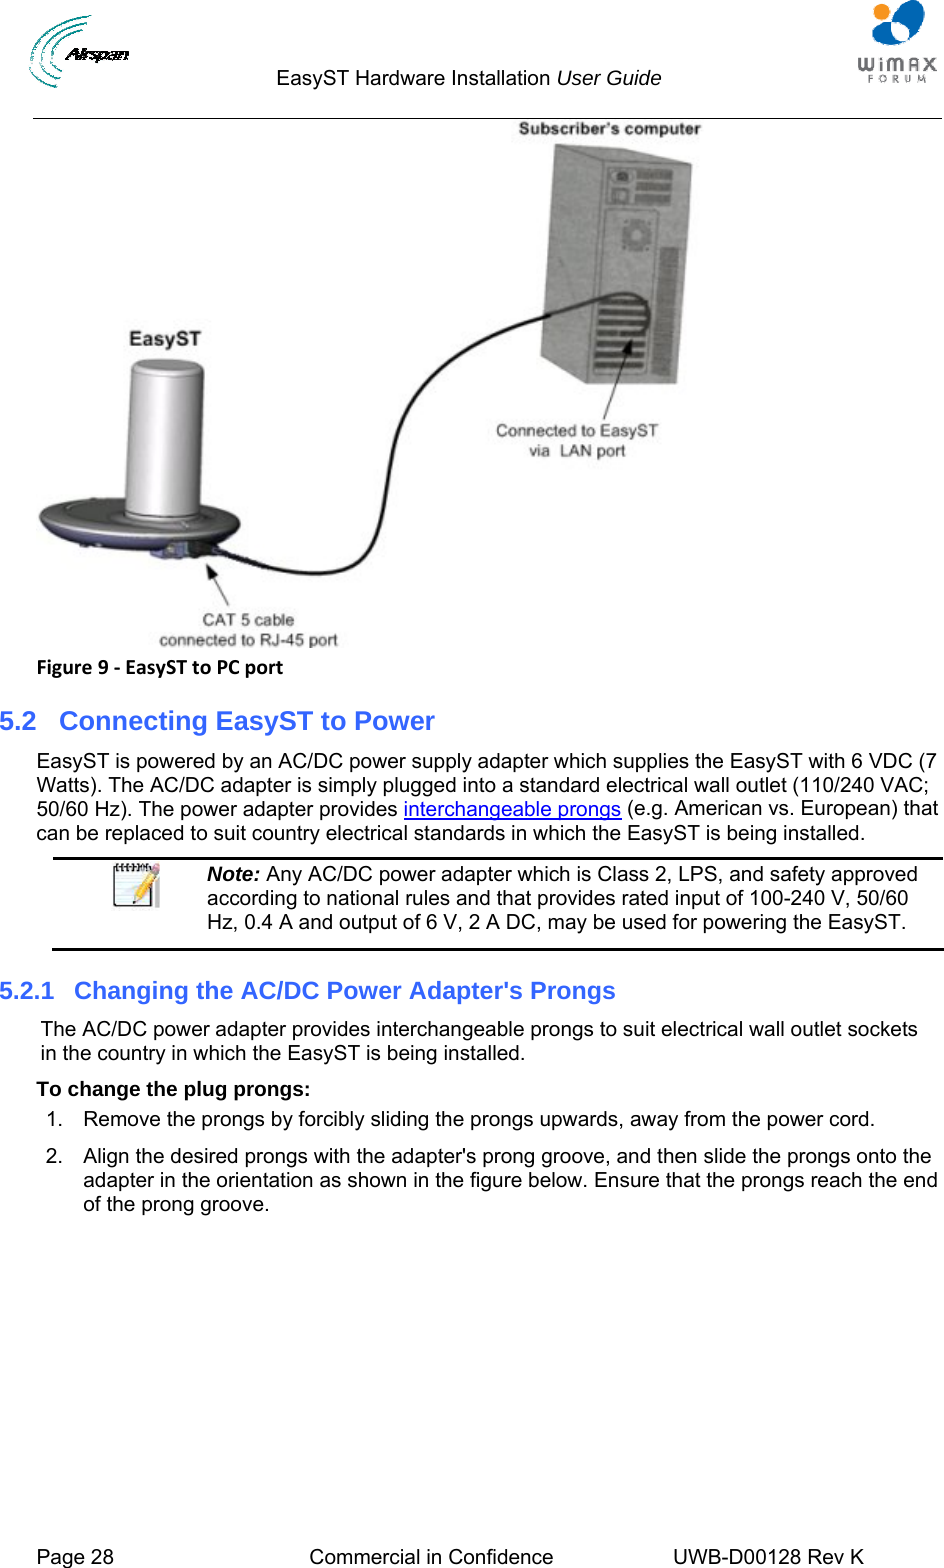                                  EasyST Hardware Installation User Guide  Page 28  Commercial in Confidence  UWB-D00128 Rev K    Figure9‐EasySTtoPCport5.2  Connecting EasyST to Power EasyST is powered by an AC/DC power supply adapter which supplies the EasyST with 6 VDC (7 Watts). The AC/DC adapter is simply plugged into a standard electrical wall outlet (110/240 VAC; 50/60 Hz). The power adapter provides interchangeable prongs (e.g. American vs. European) that can be replaced to suit country electrical standards in which the EasyST is being installed.  Note: Any AC/DC power adapter which is Class 2, LPS, and safety approved according to national rules and that provides rated input of 100-240 V, 50/60 Hz, 0.4 A and output of 6 V, 2 A DC, may be used for powering the EasyST. 5.2.1  Changing the AC/DC Power Adapter&apos;s Prongs The AC/DC power adapter provides interchangeable prongs to suit electrical wall outlet sockets in the country in which the EasyST is being installed. To change the plug prongs: 1.  Remove the prongs by forcibly sliding the prongs upwards, away from the power cord. 2.  Align the desired prongs with the adapter&apos;s prong groove, and then slide the prongs onto the adapter in the orientation as shown in the figure below. Ensure that the prongs reach the end of the prong groove. 